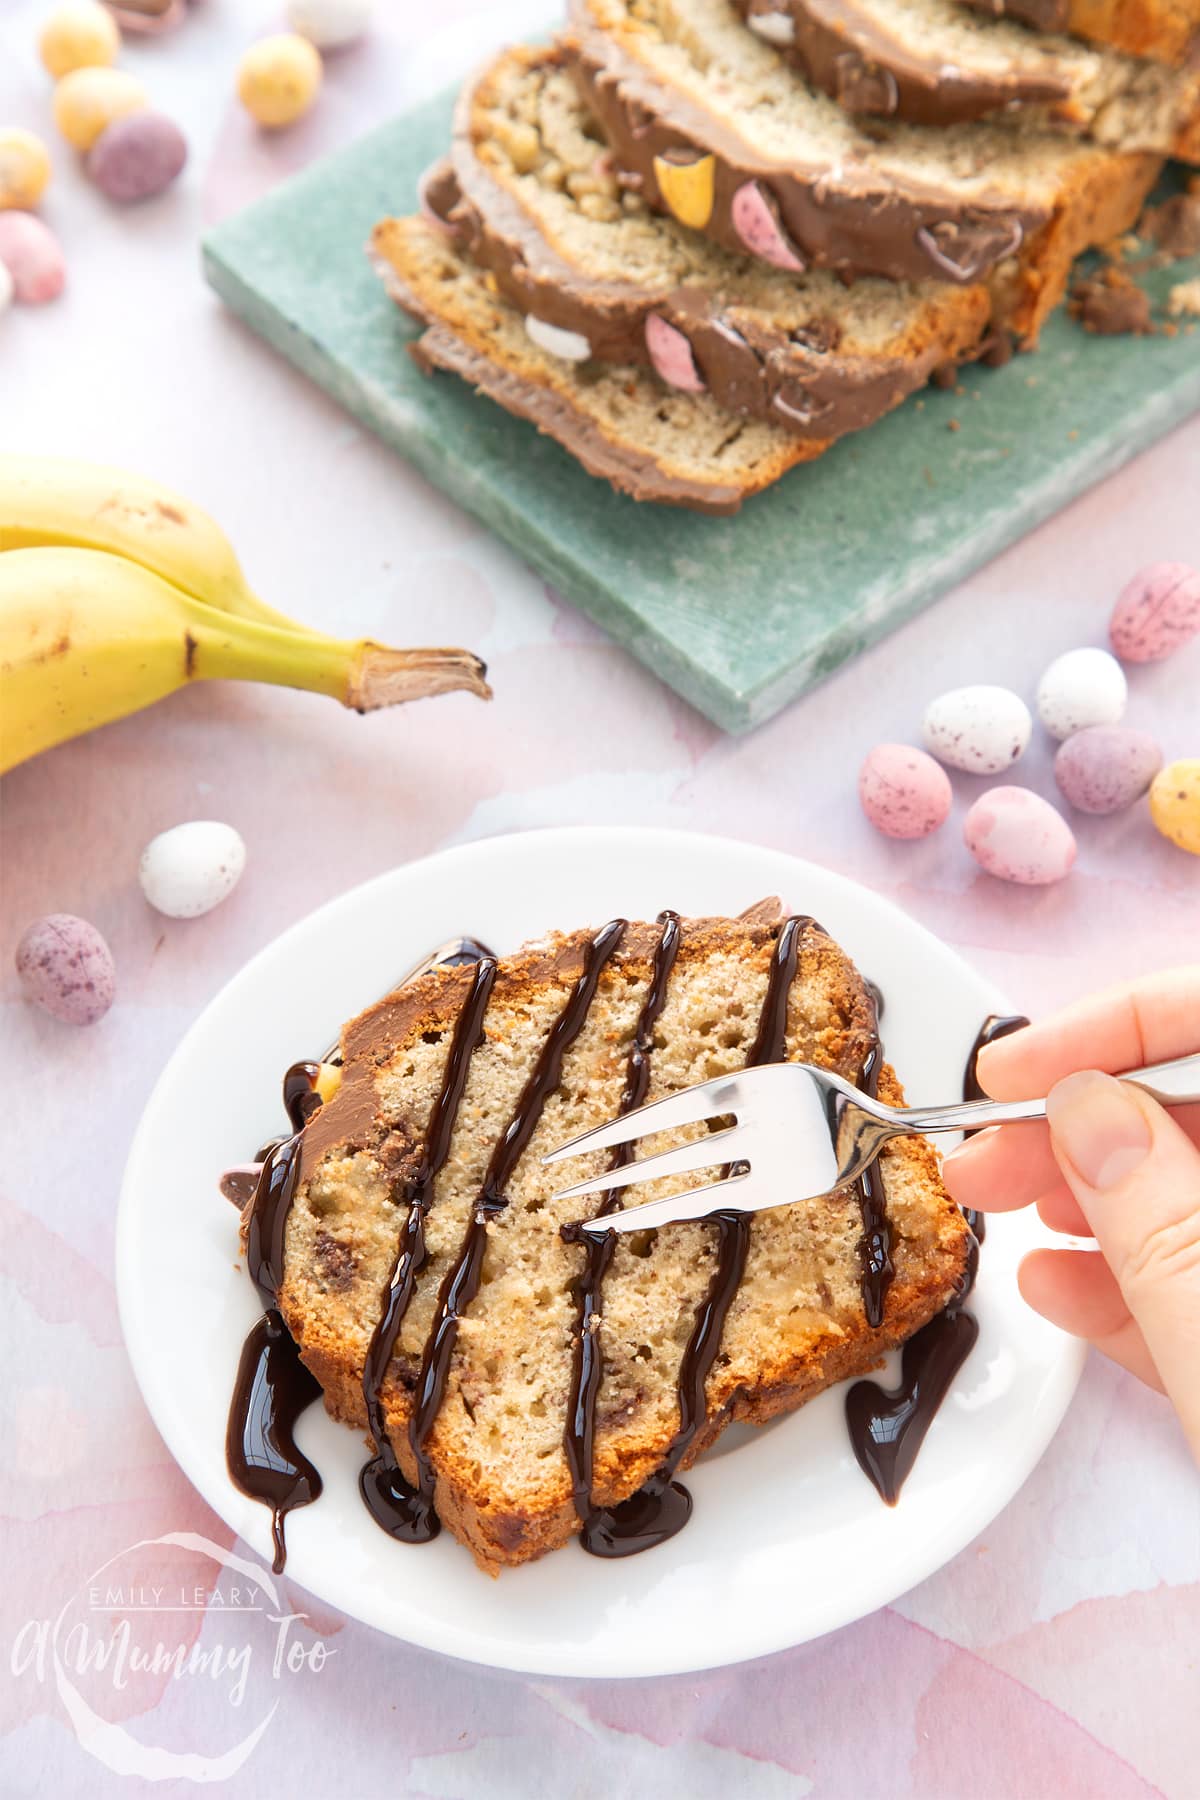 A slice of Easter banana bread on a white plate. The slice is drizzled with chocolate sauce and a hand holding a fork digs into it.